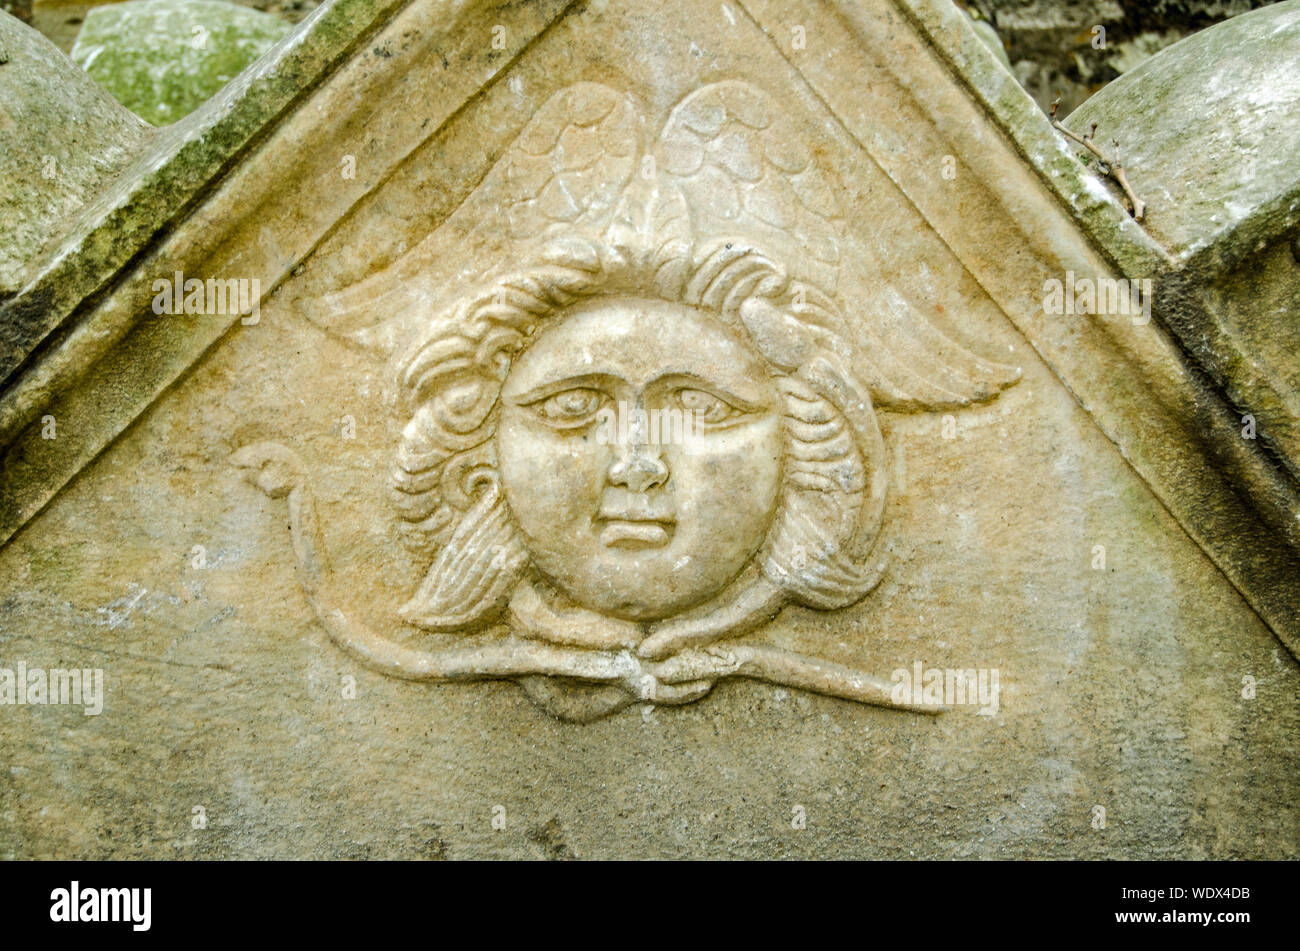 An ancient carving of an angel with a chubby face and what looks like a snake around its neck and wings behind.  Stone sarcophagus dating from late Ro Stock Photo